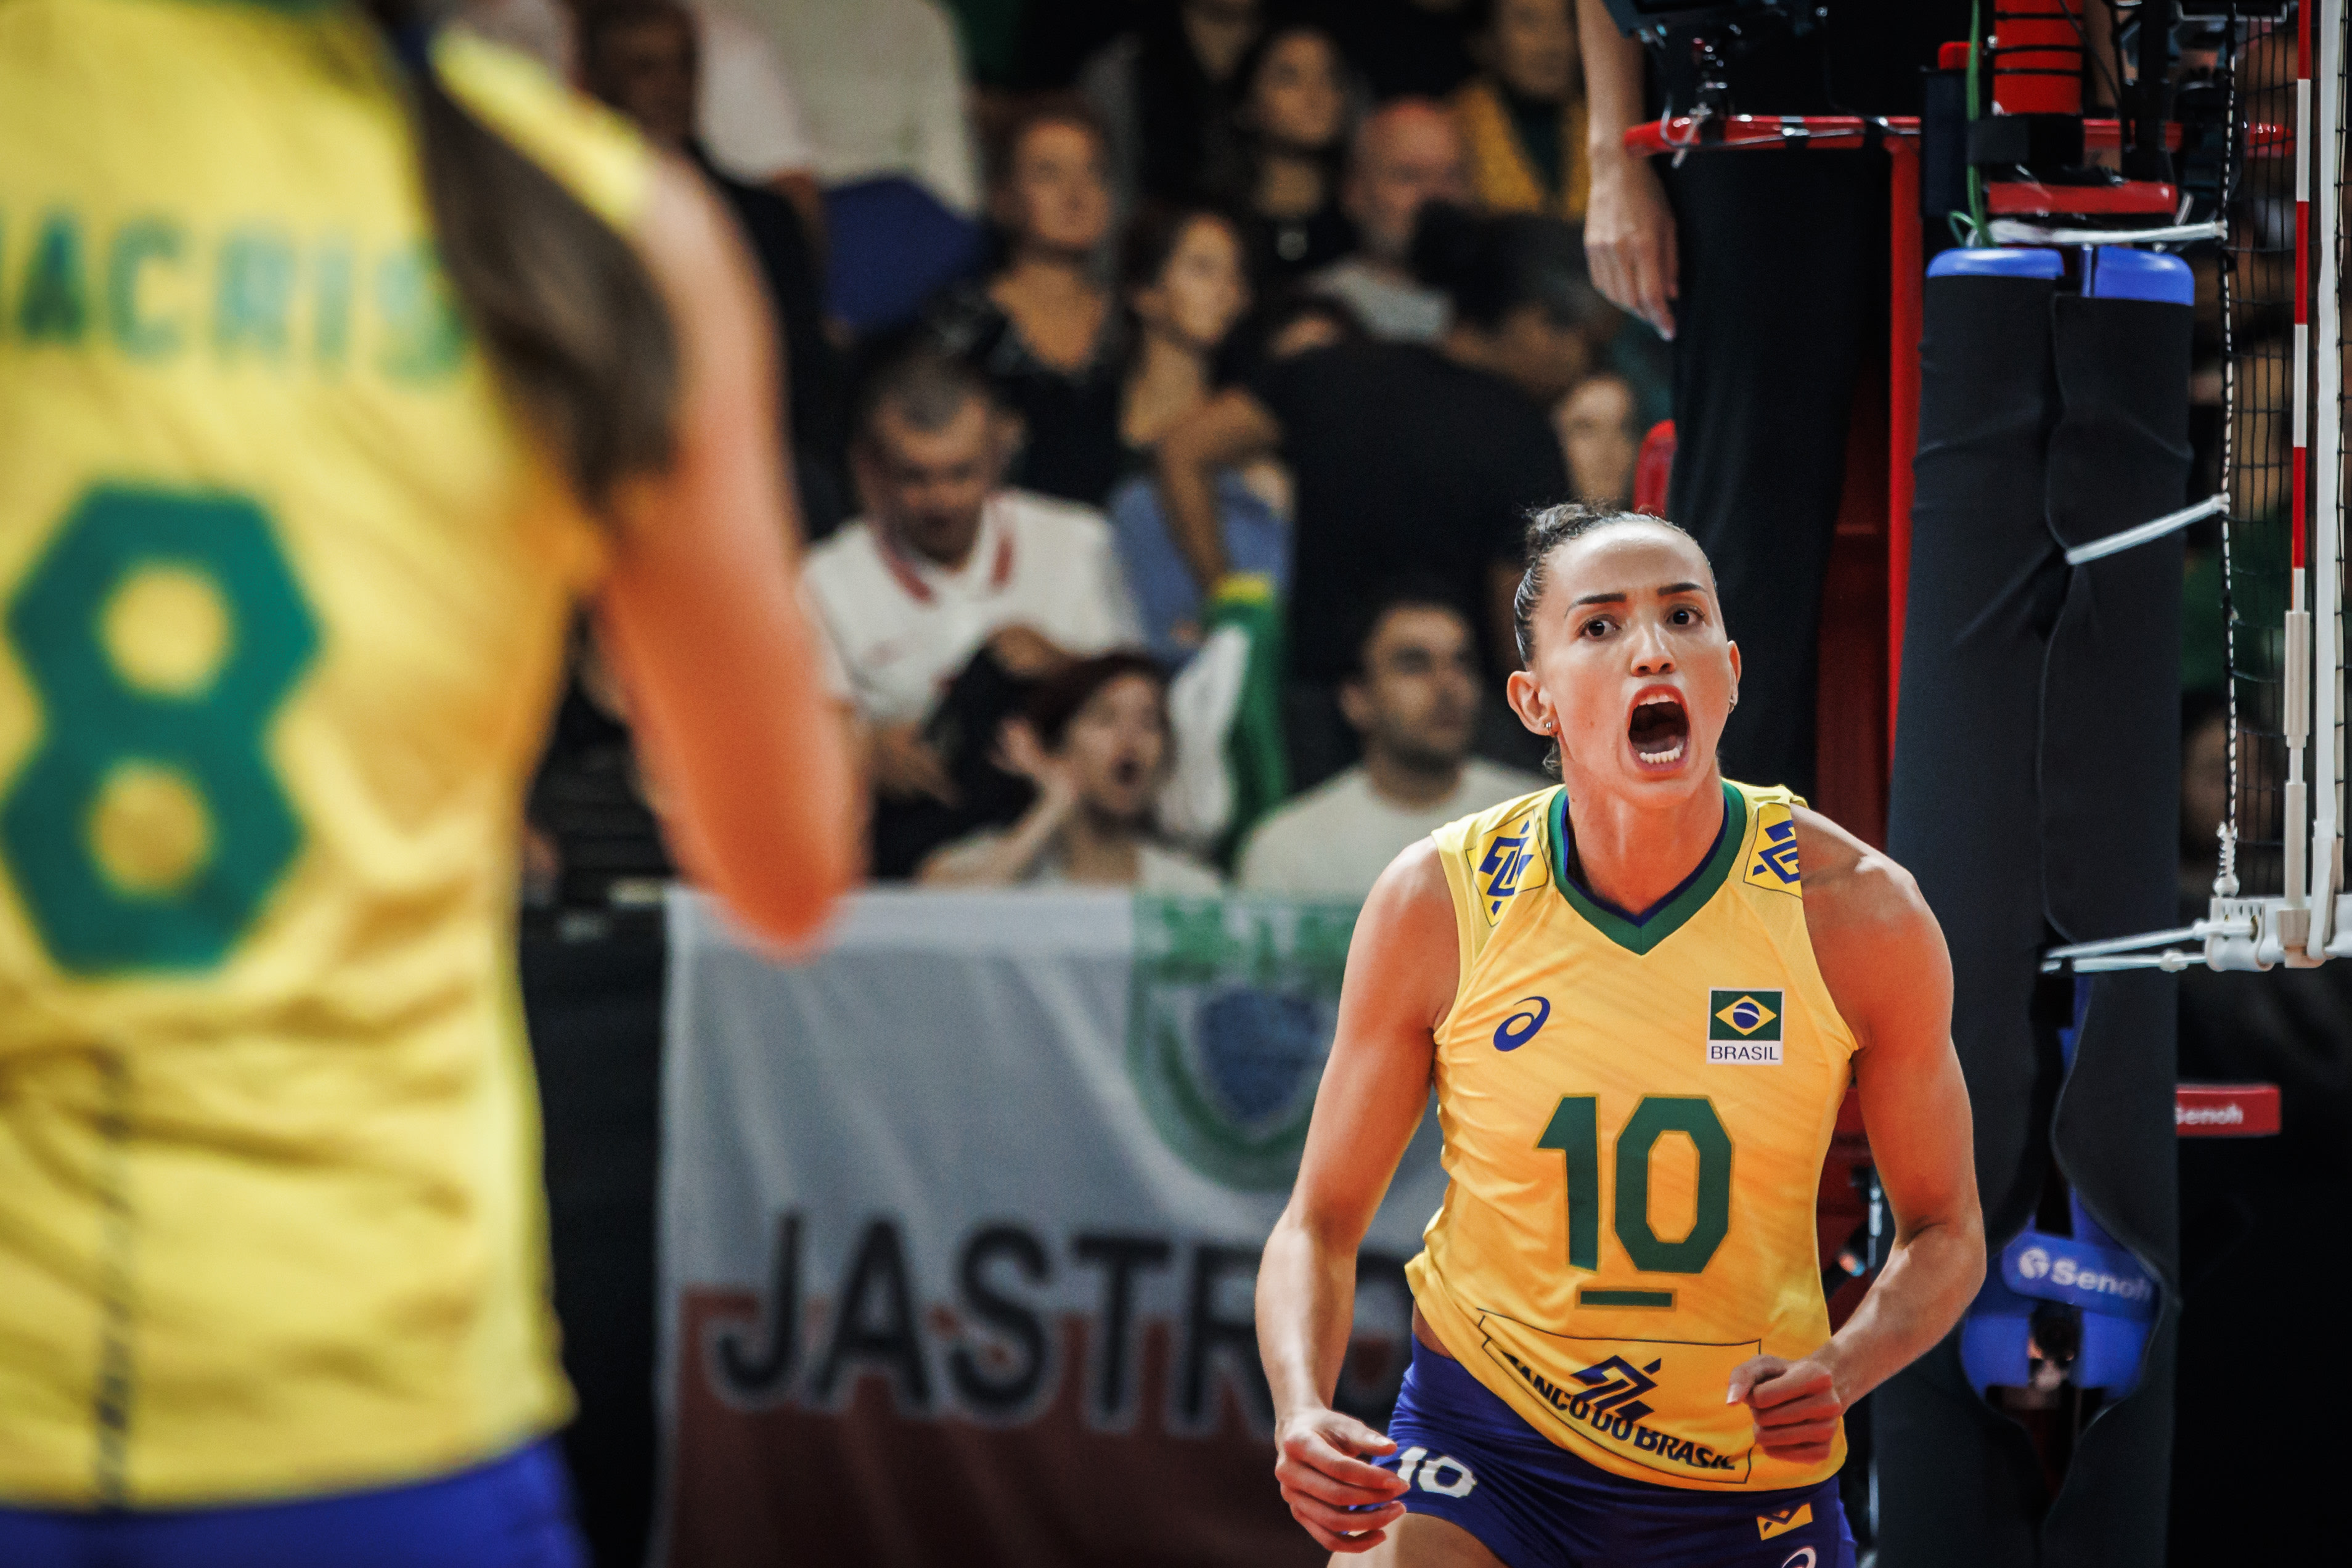 Brazil back in World Champs final after 12 years